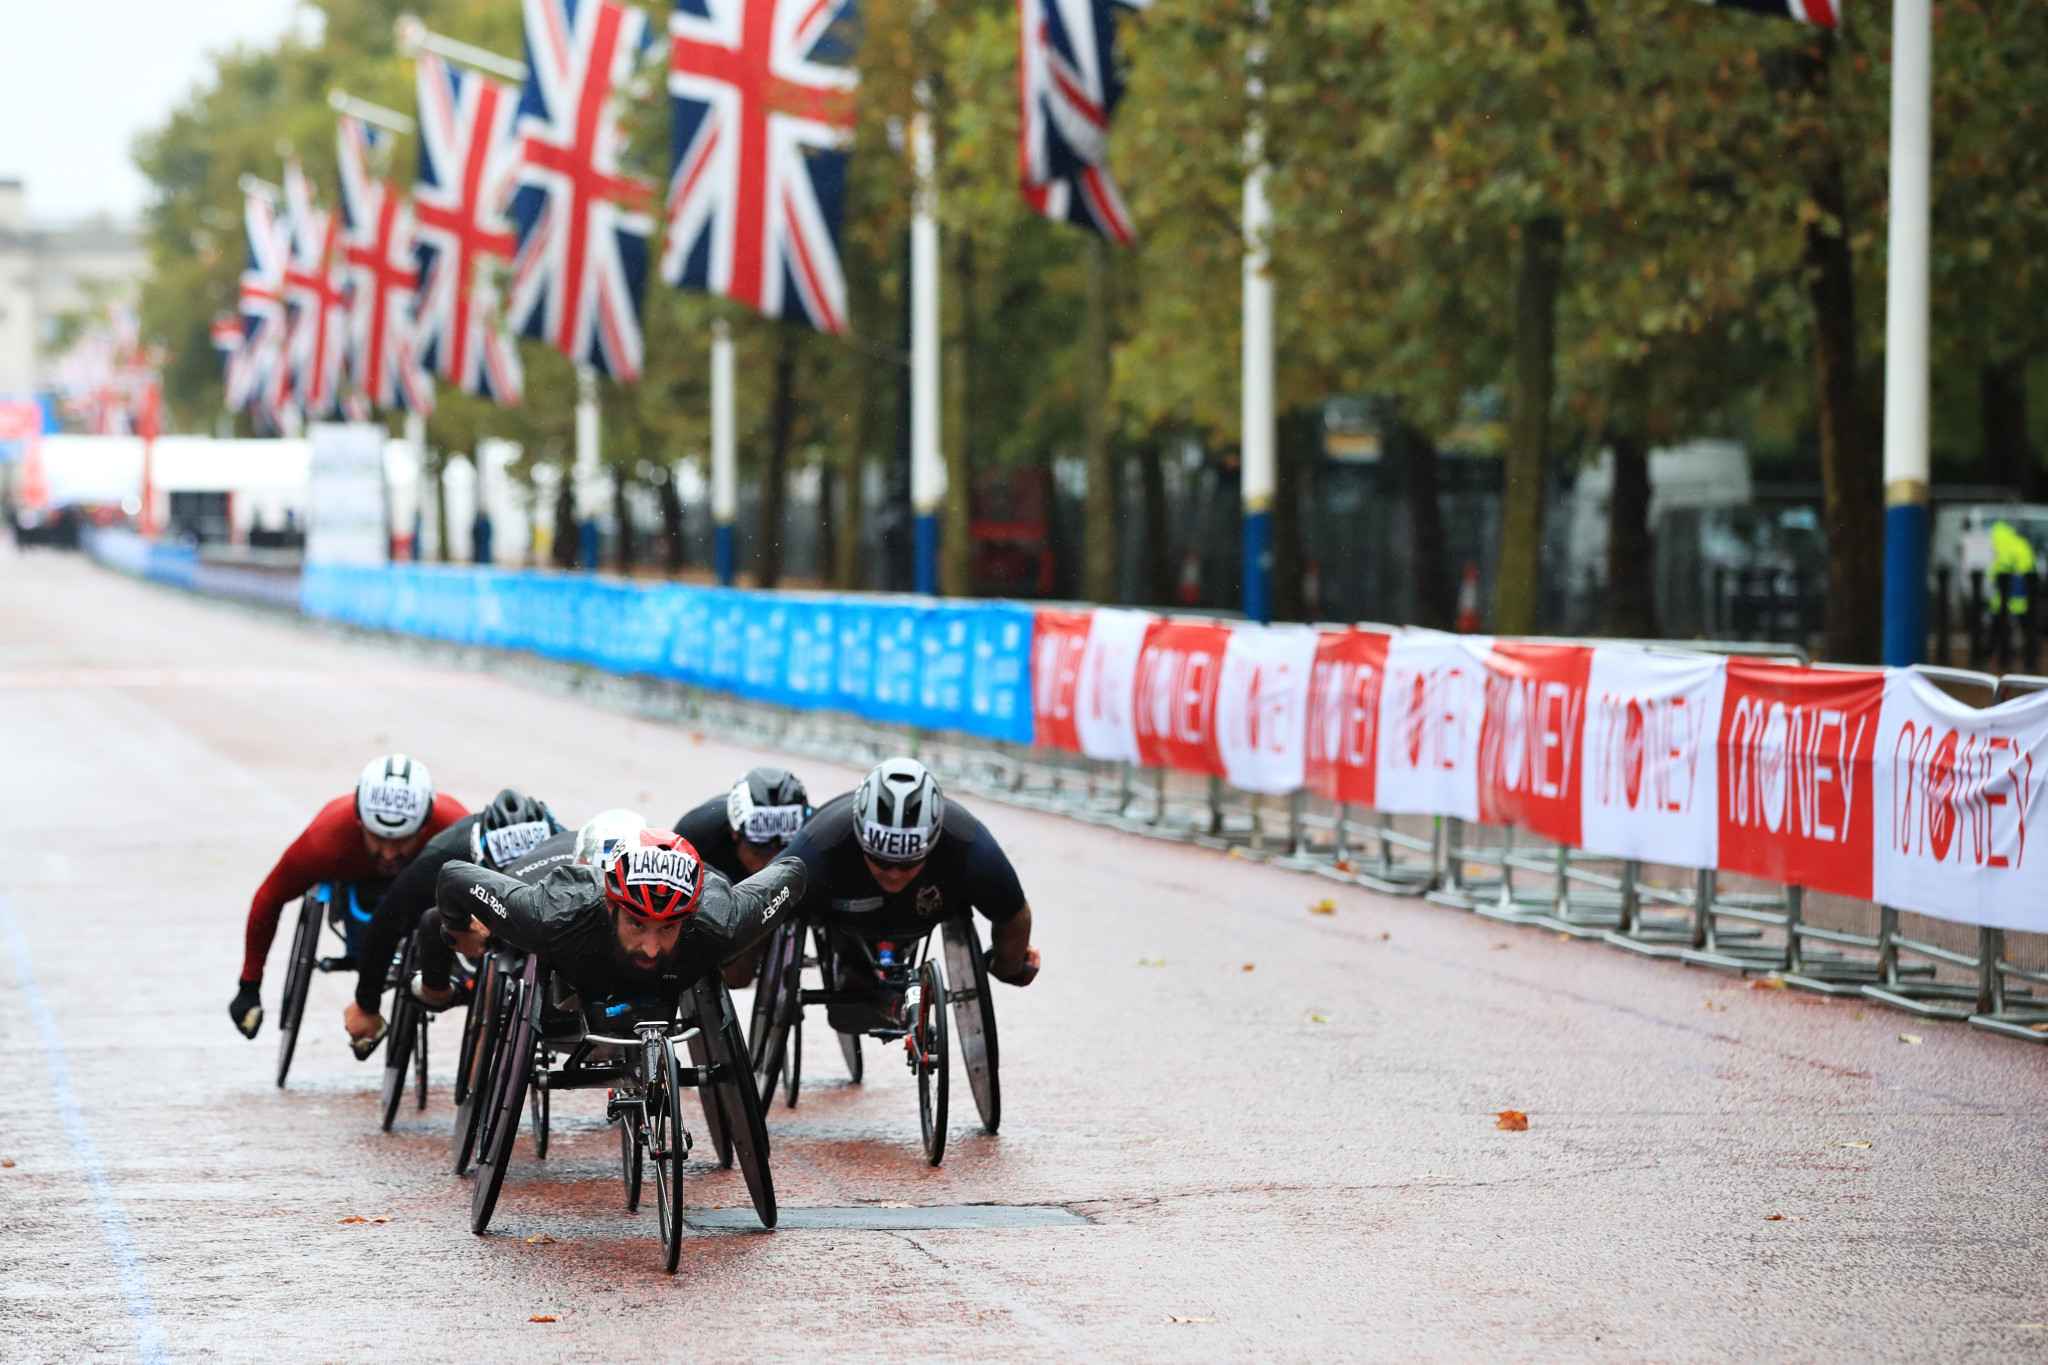 London Marathon to hold most lucrative wheelchair races to date in 2022